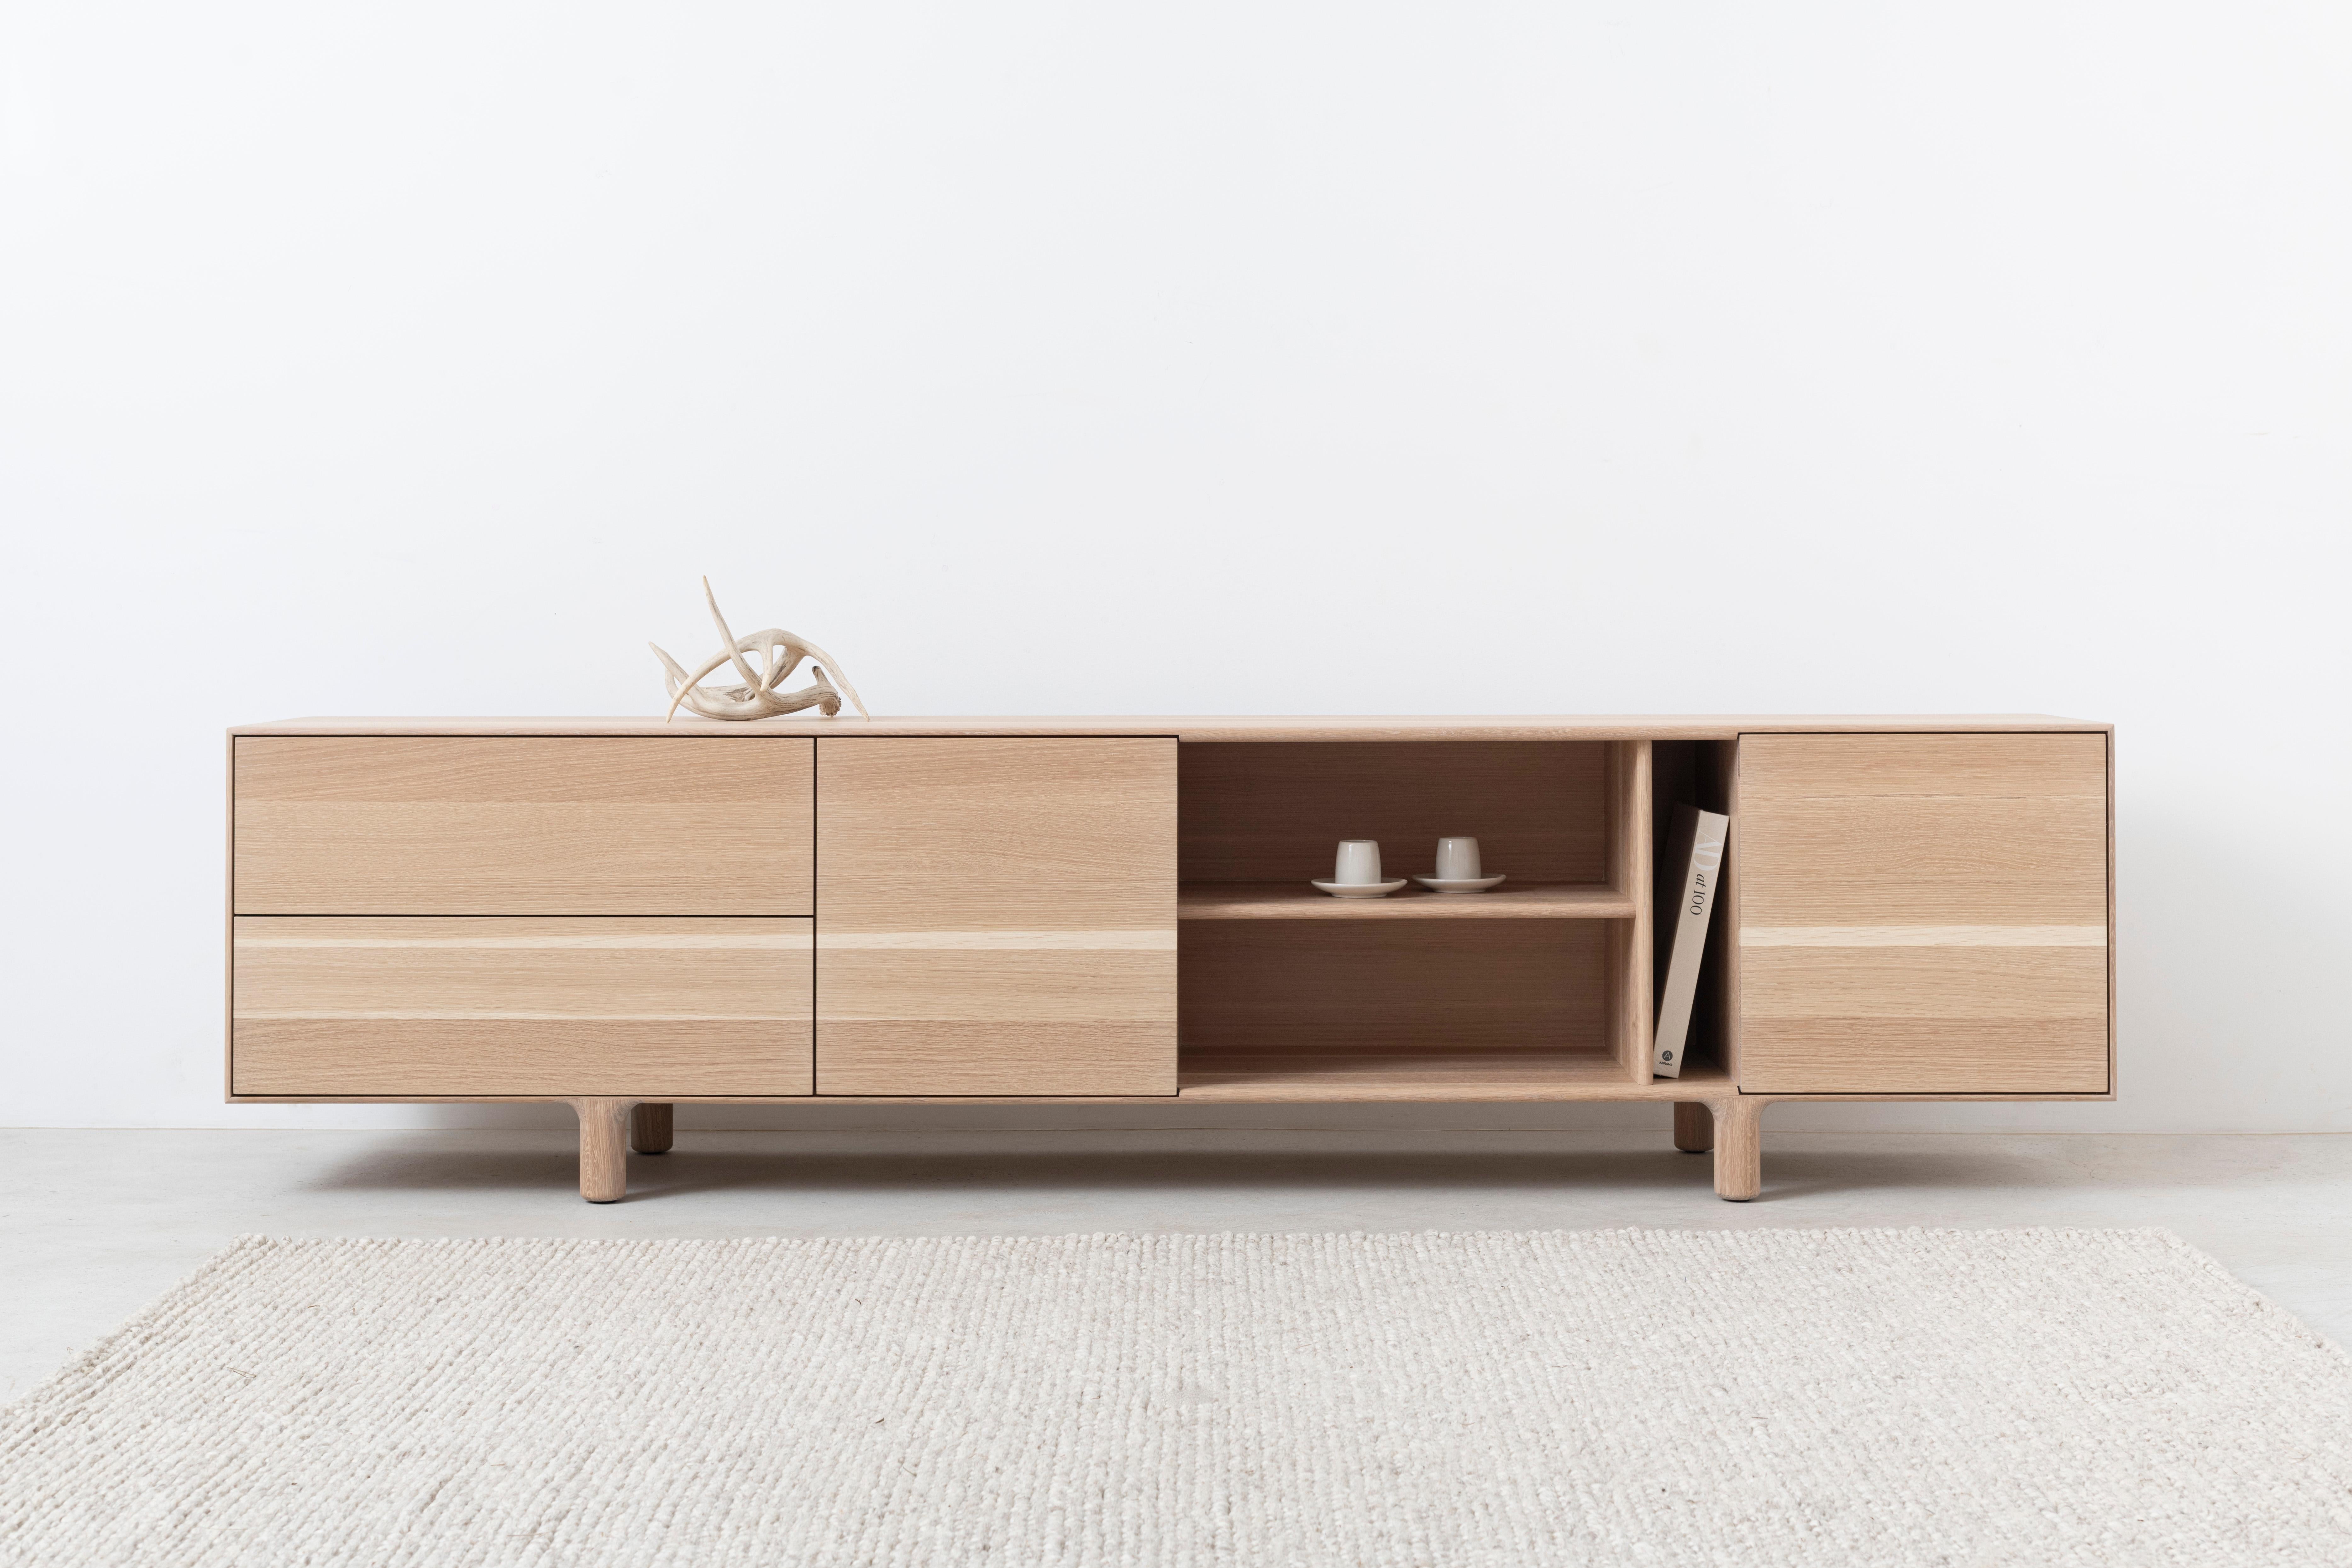 This cabinet is ready to ship & nearly 25% off! Only one available!
Kinetic by Izm is a solid hardwood sideboard featuring an asymmetric arrangement of drawers, doors, and open shelving w flush mounted, continuous grain faces. This modern cabinet